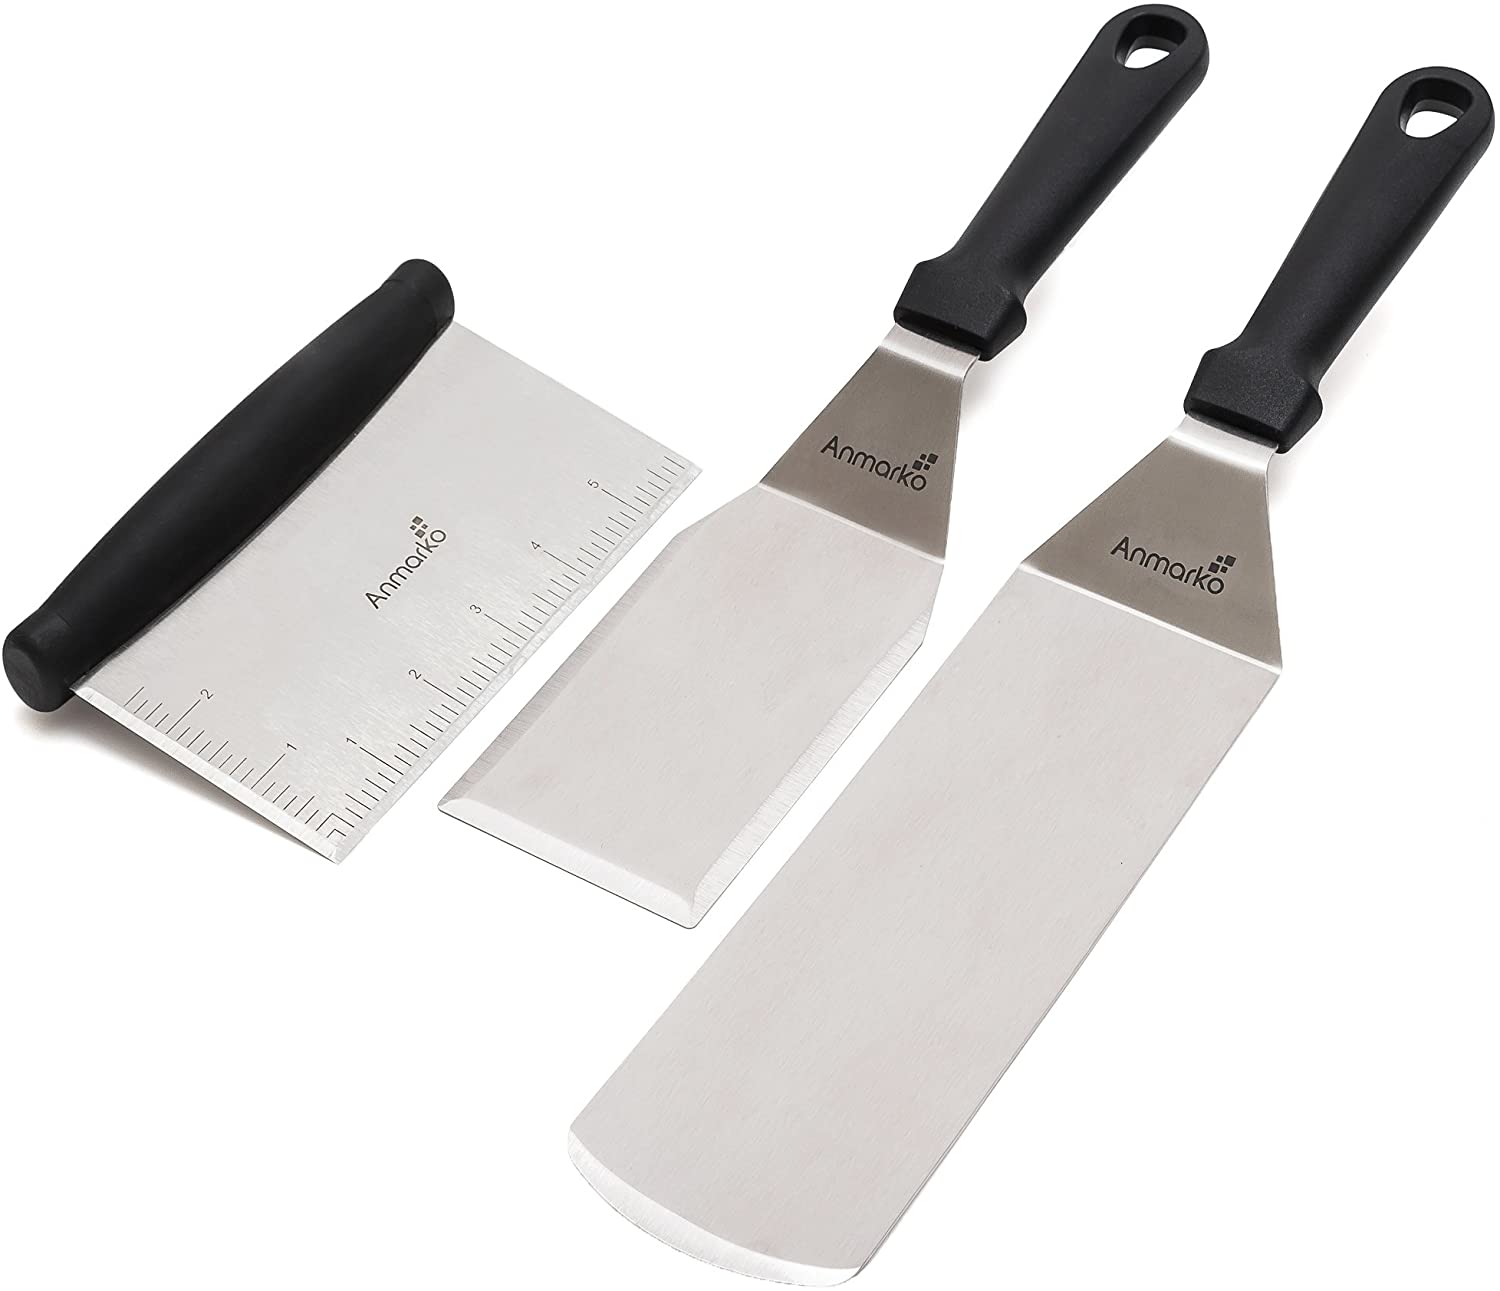 Metal Spatula Stainless Steel and Scraper